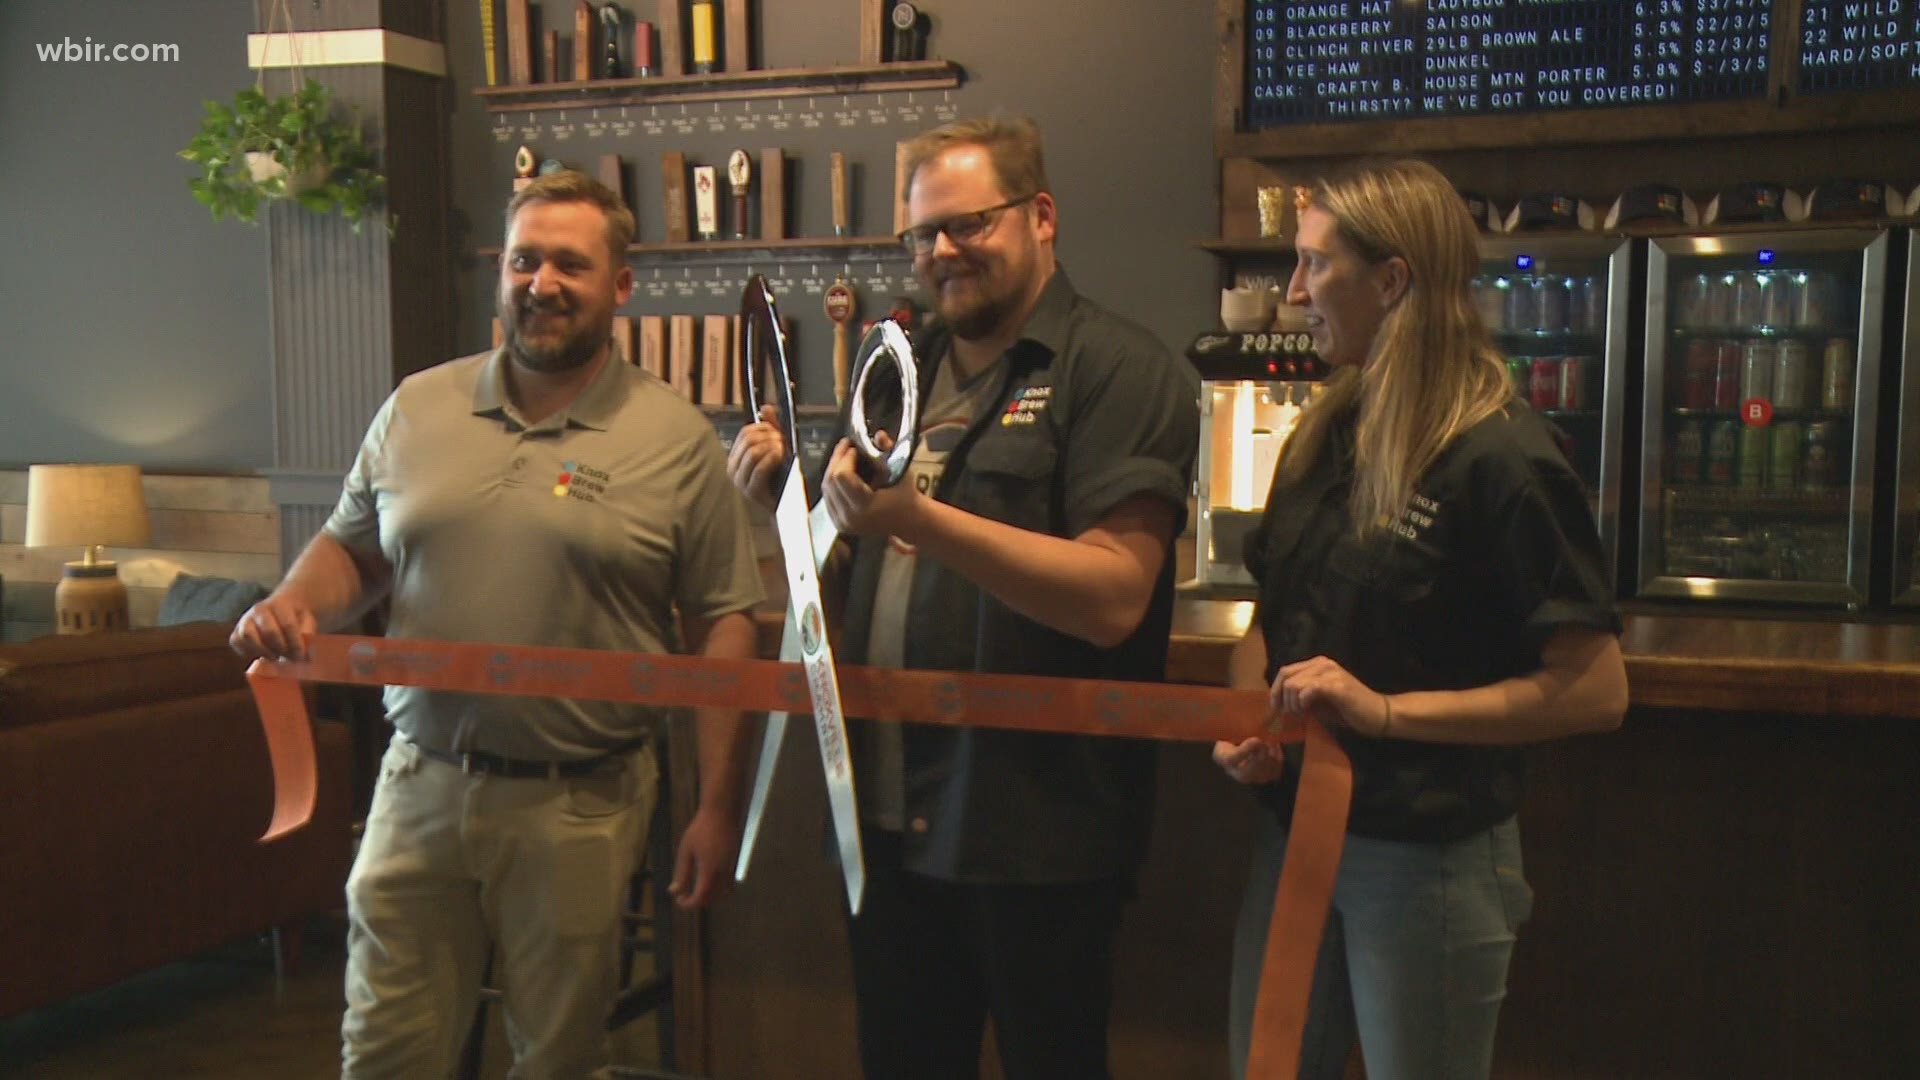 Knox Brew Hub's grand opening in downtown Knoxville was Monday. It's a new bar that will feature beers from a variety of microbreweries.